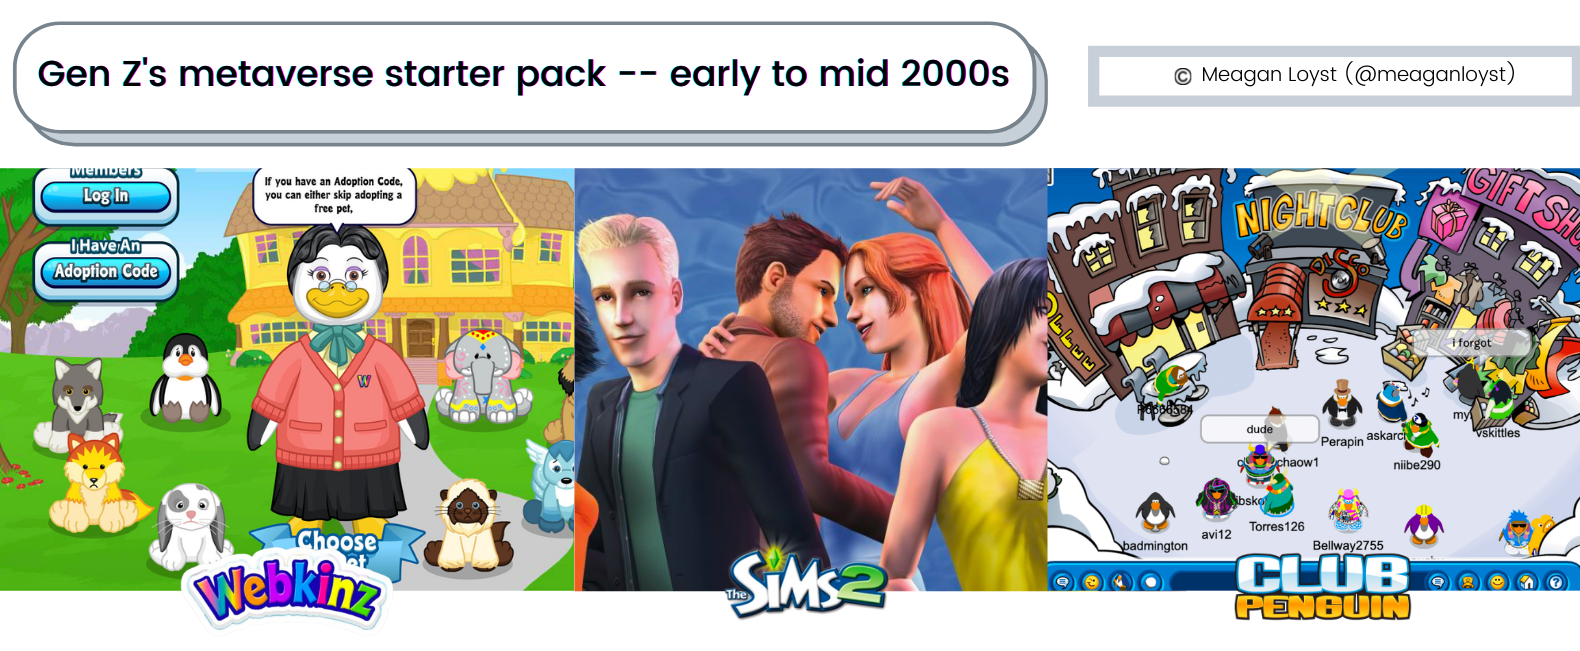 The "metaverse" starter pack for Gen Z, especially those born in the late 90's / early 2000s